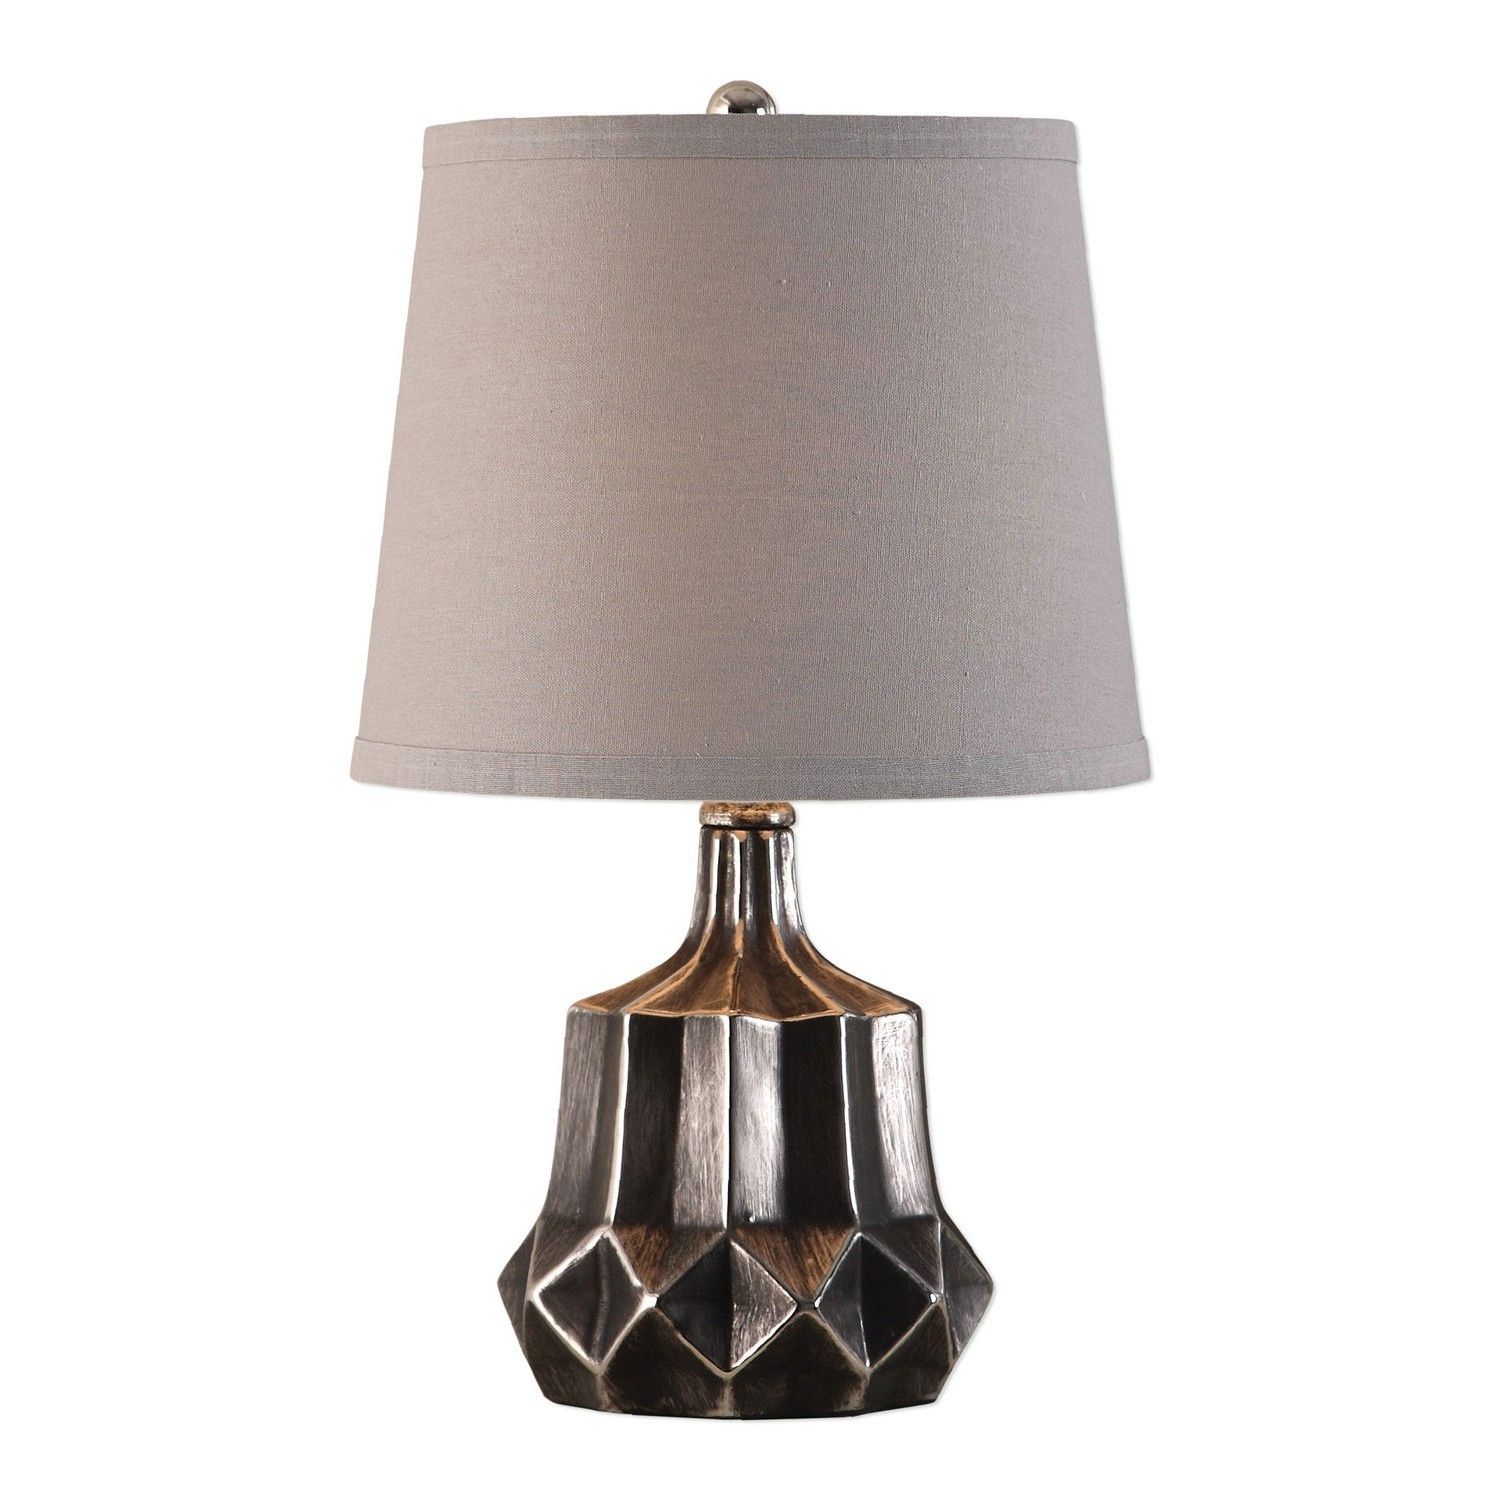 15 Best Overstock Living Room Table Lamps